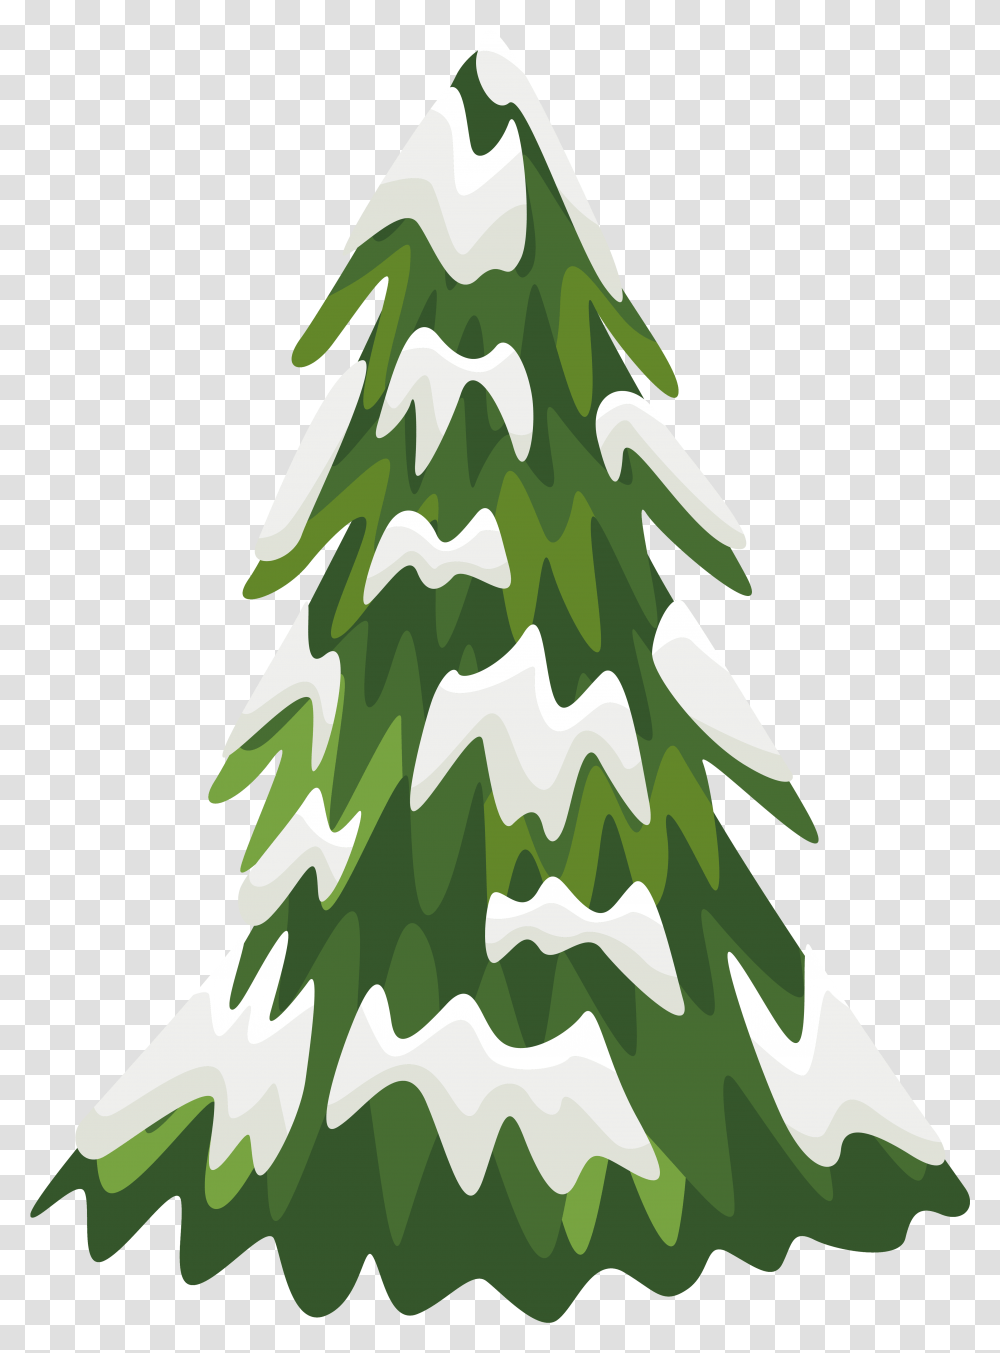 Library Of Pine Tree Clip Art Freeuse Snowy Tree Clipart, Military Uniform, Plant, Camouflage Transparent Png